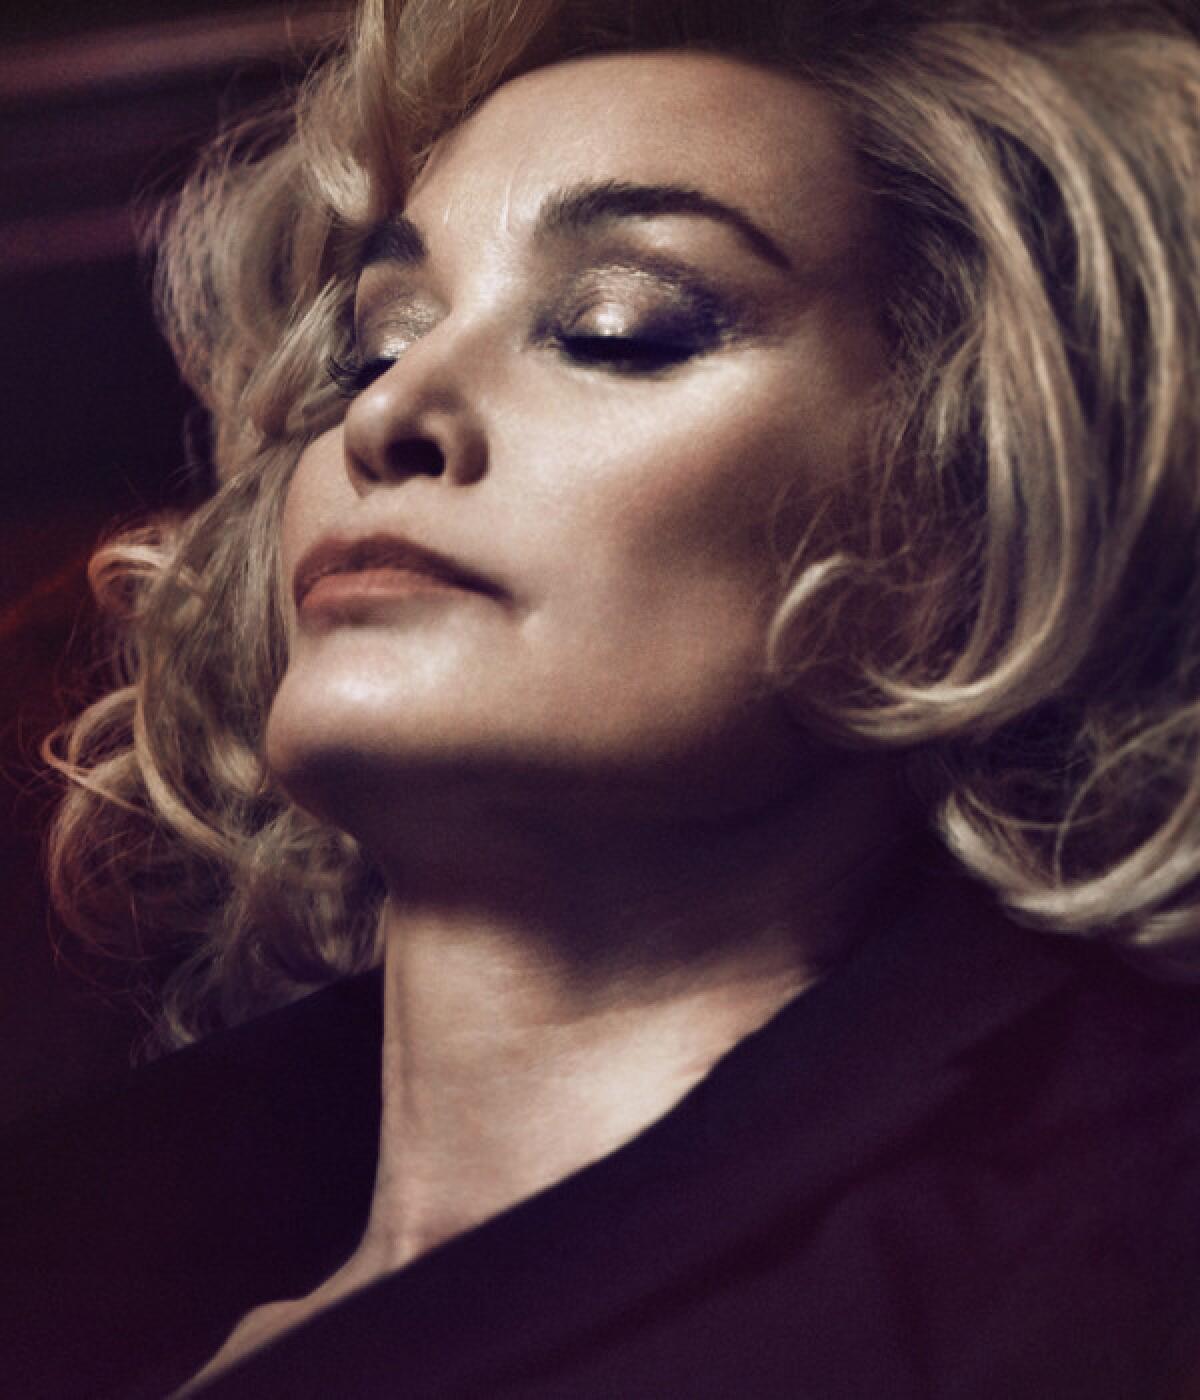 Marc Jacobs Beauty fall 2014 advertising campaign image featuring actress Jessica Lange; courtesy of Marc Jacobs